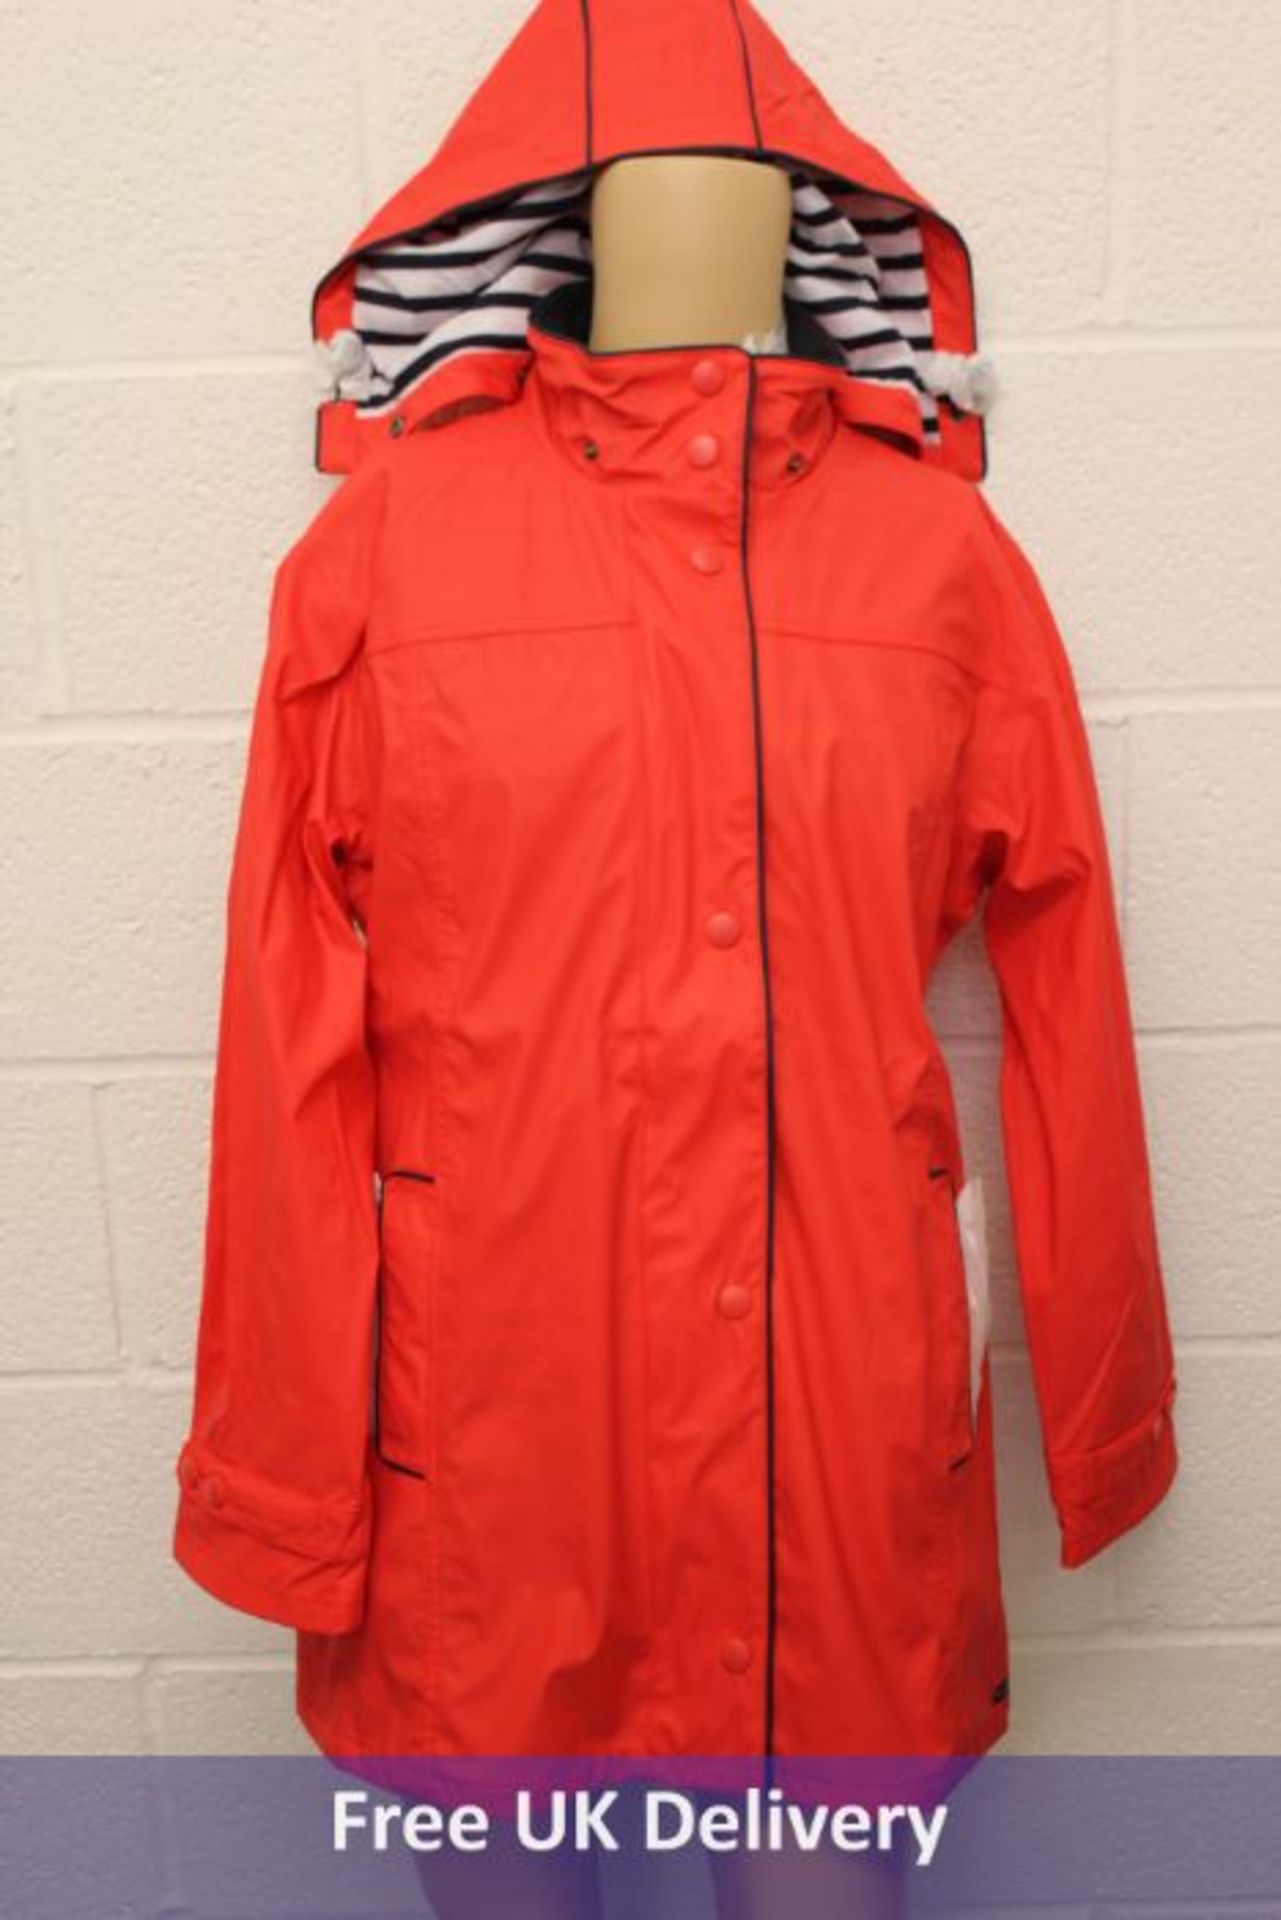 Four Captain Corsaire Women's Regate Ete Waterproof Rain Coats, Red, to include 2x Size 20 and 2x Si